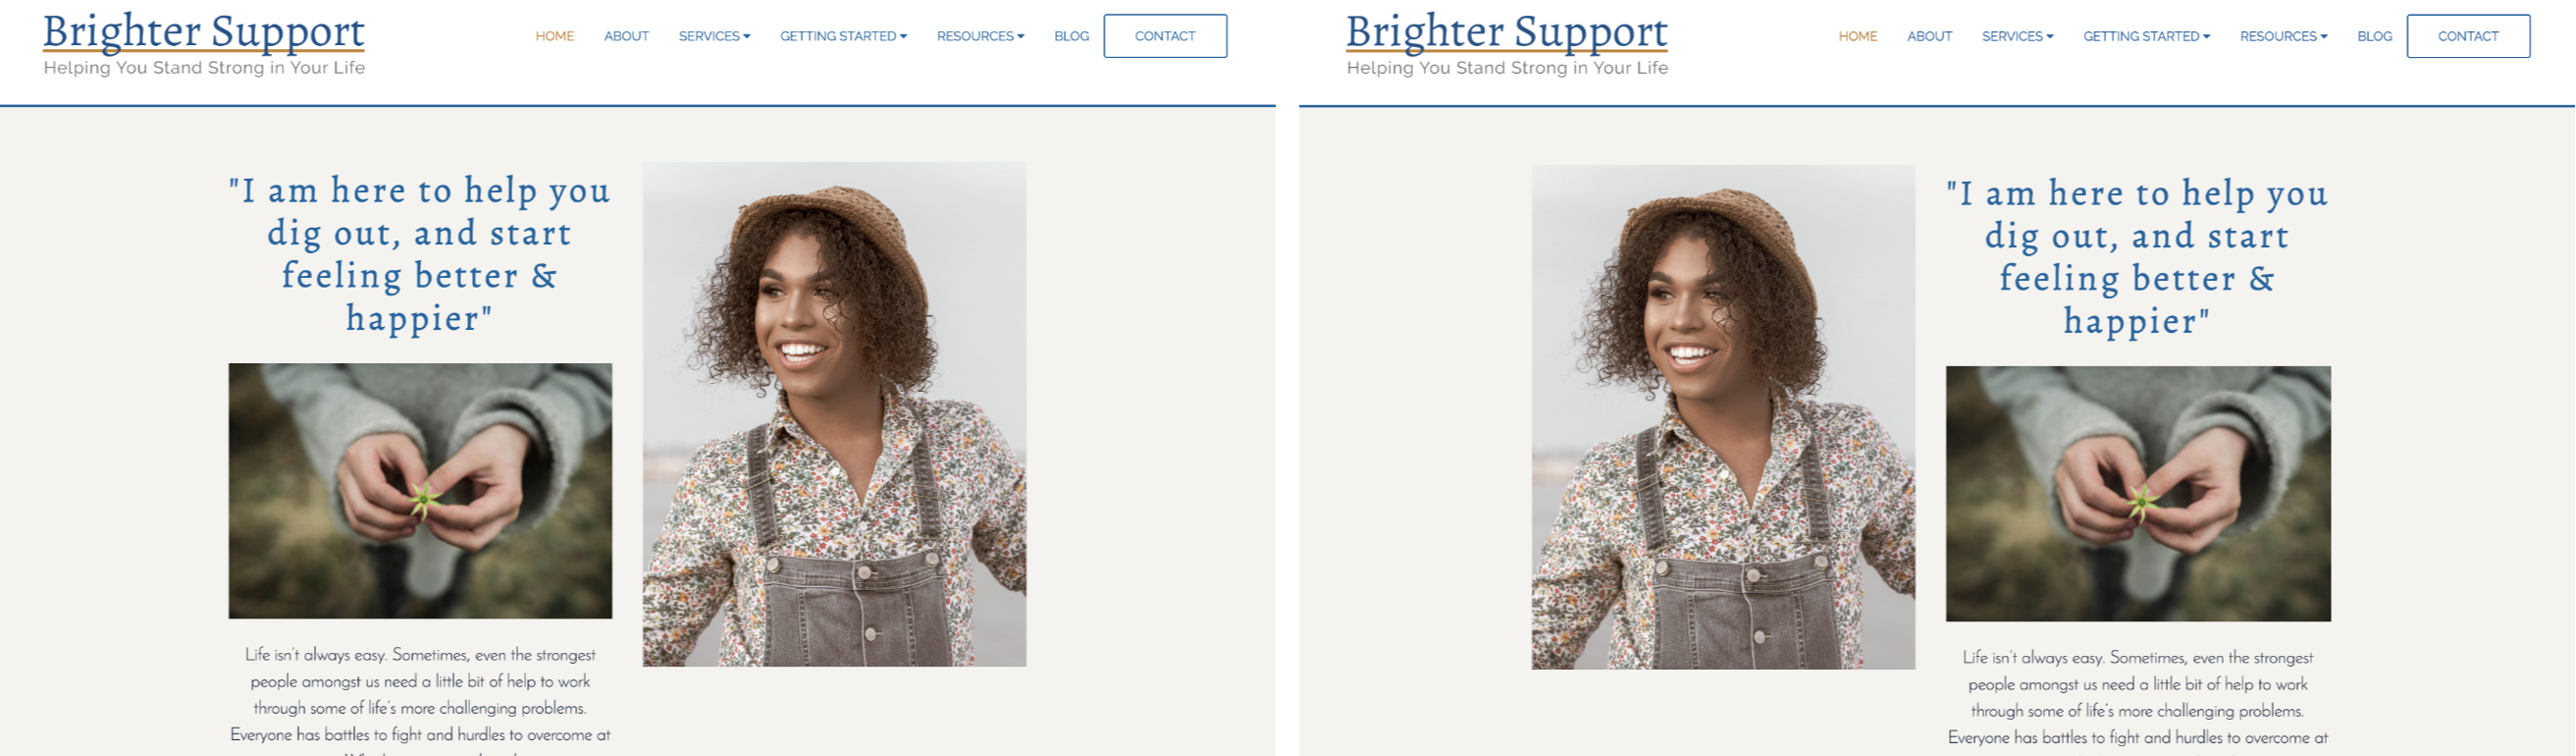 Flexible Homepage Design | New Therapist Website Theme: Denver | Brighter Vision Web Solutions | Custom Websites for Therapists